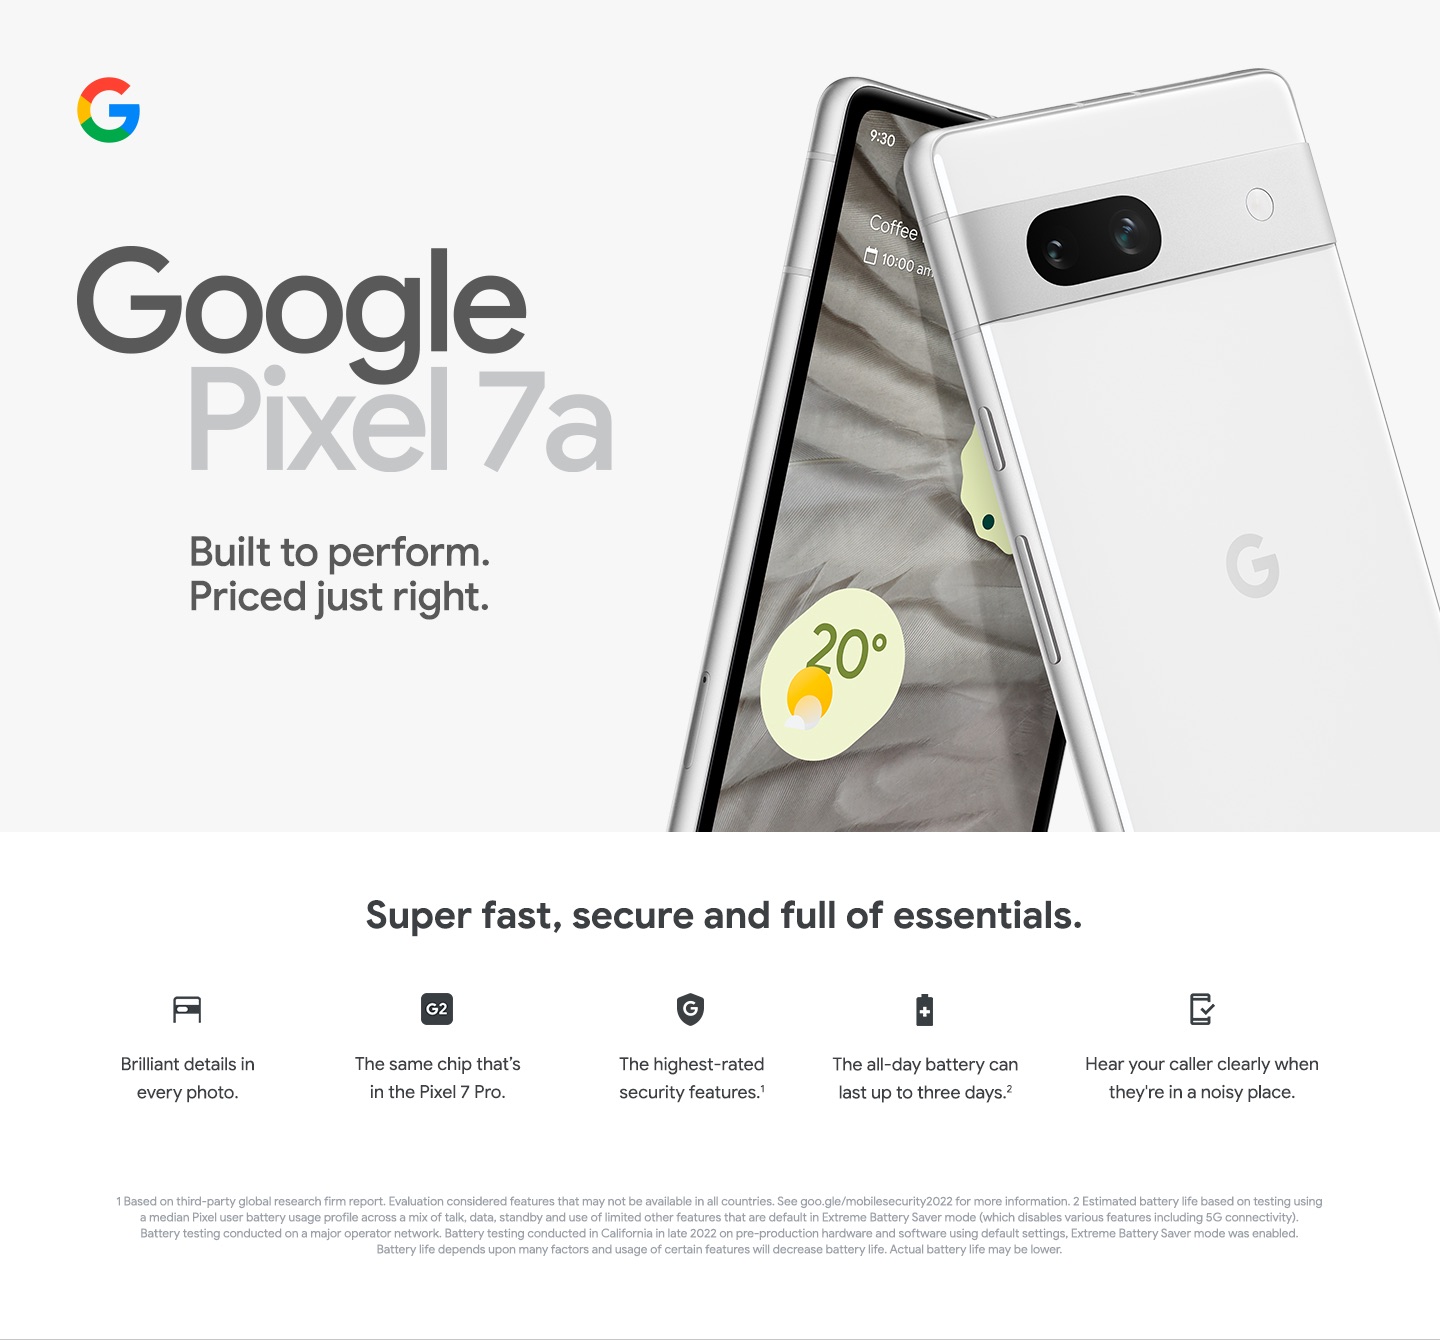 Google Pixel 7a Smartphone, Android, 6.1”, 5G, Sim Free, 128GB, Cotton